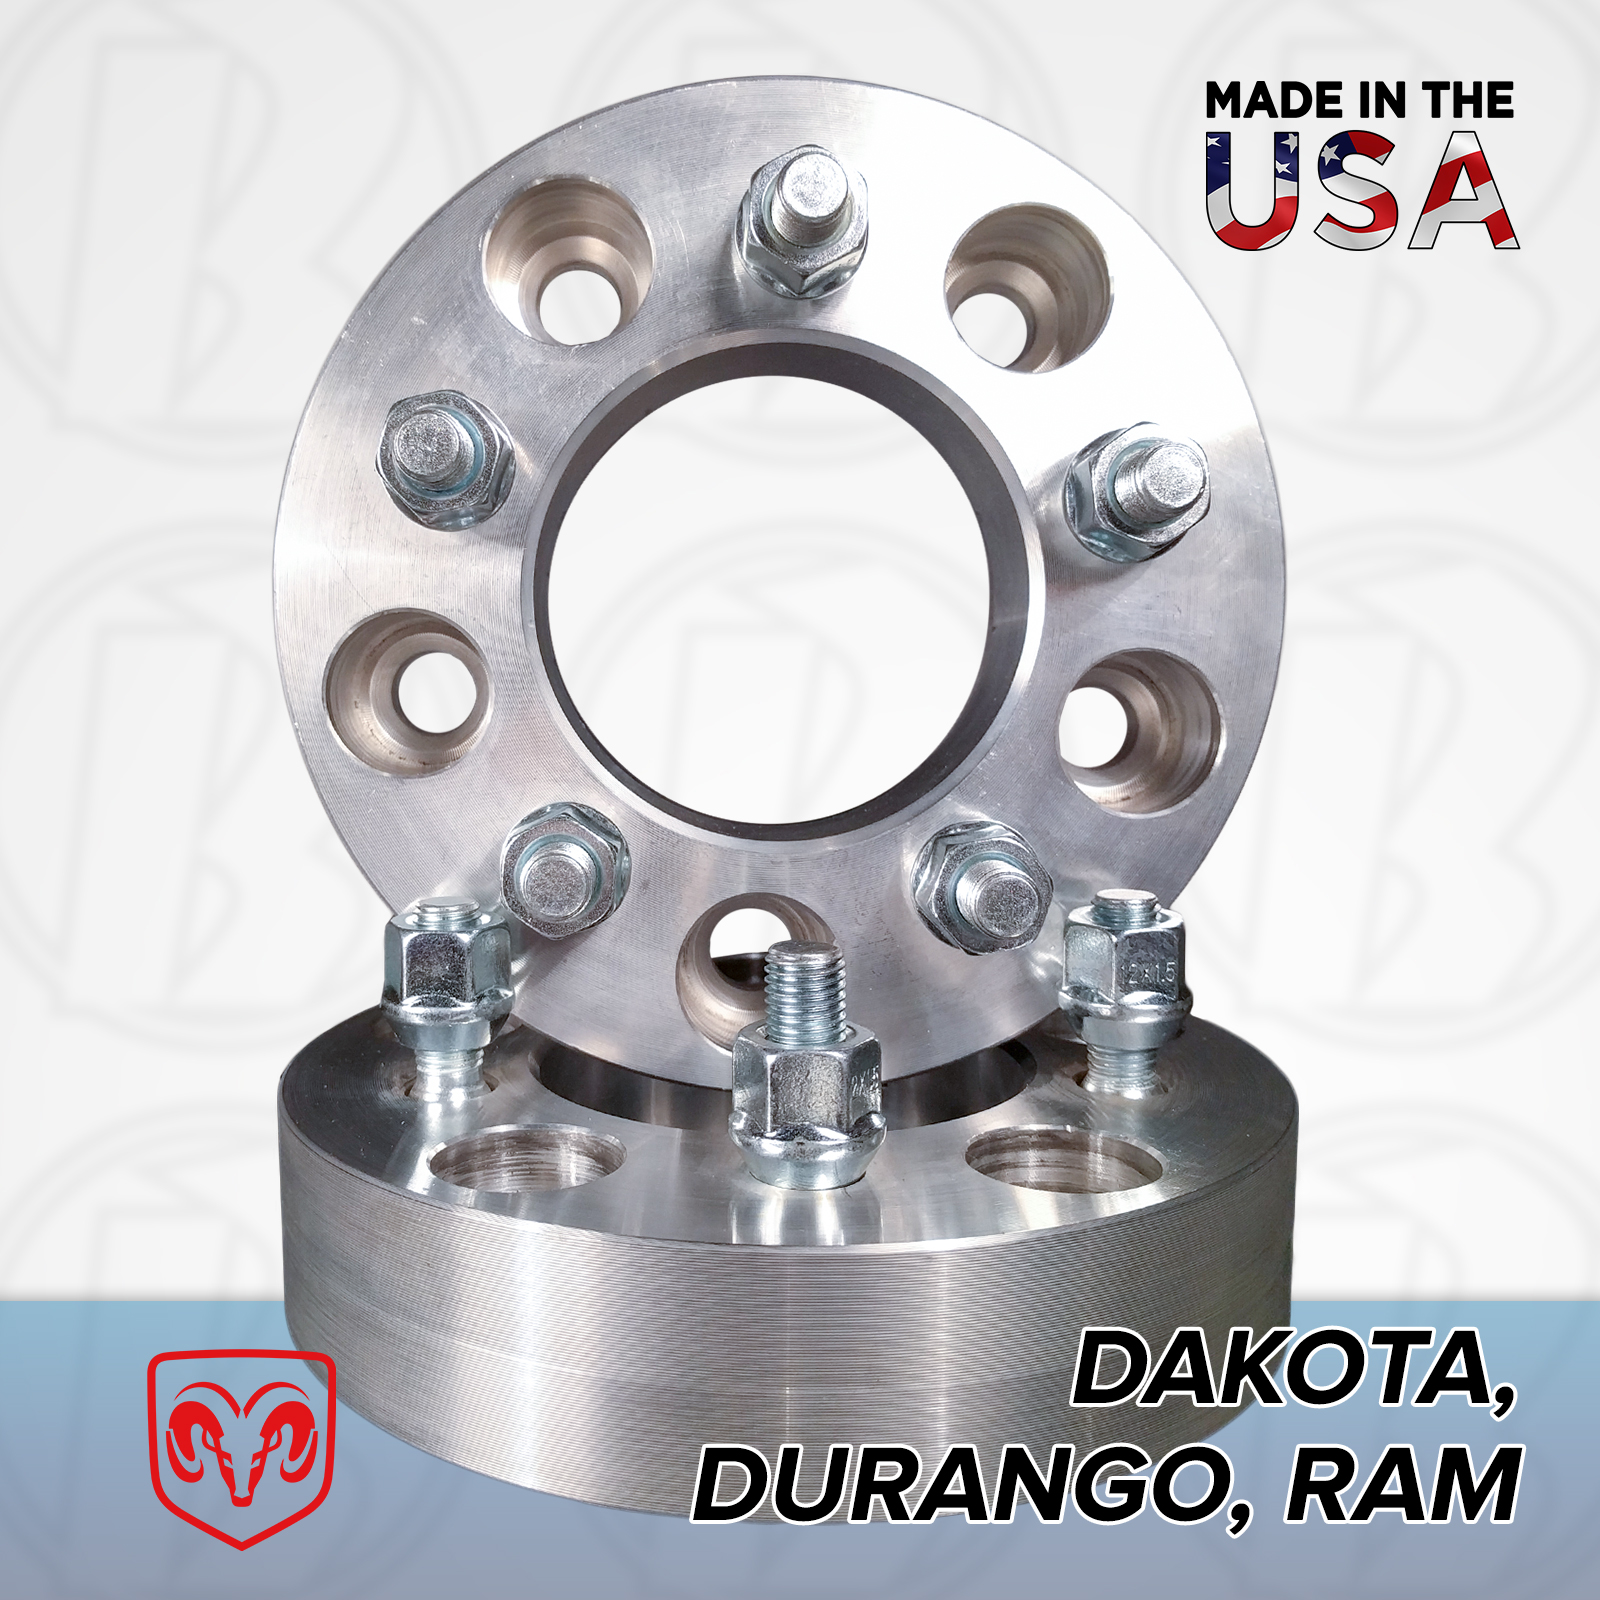 5x5.5 Dodge To 5x4.5 Wheel Adapters / 1" Spacers